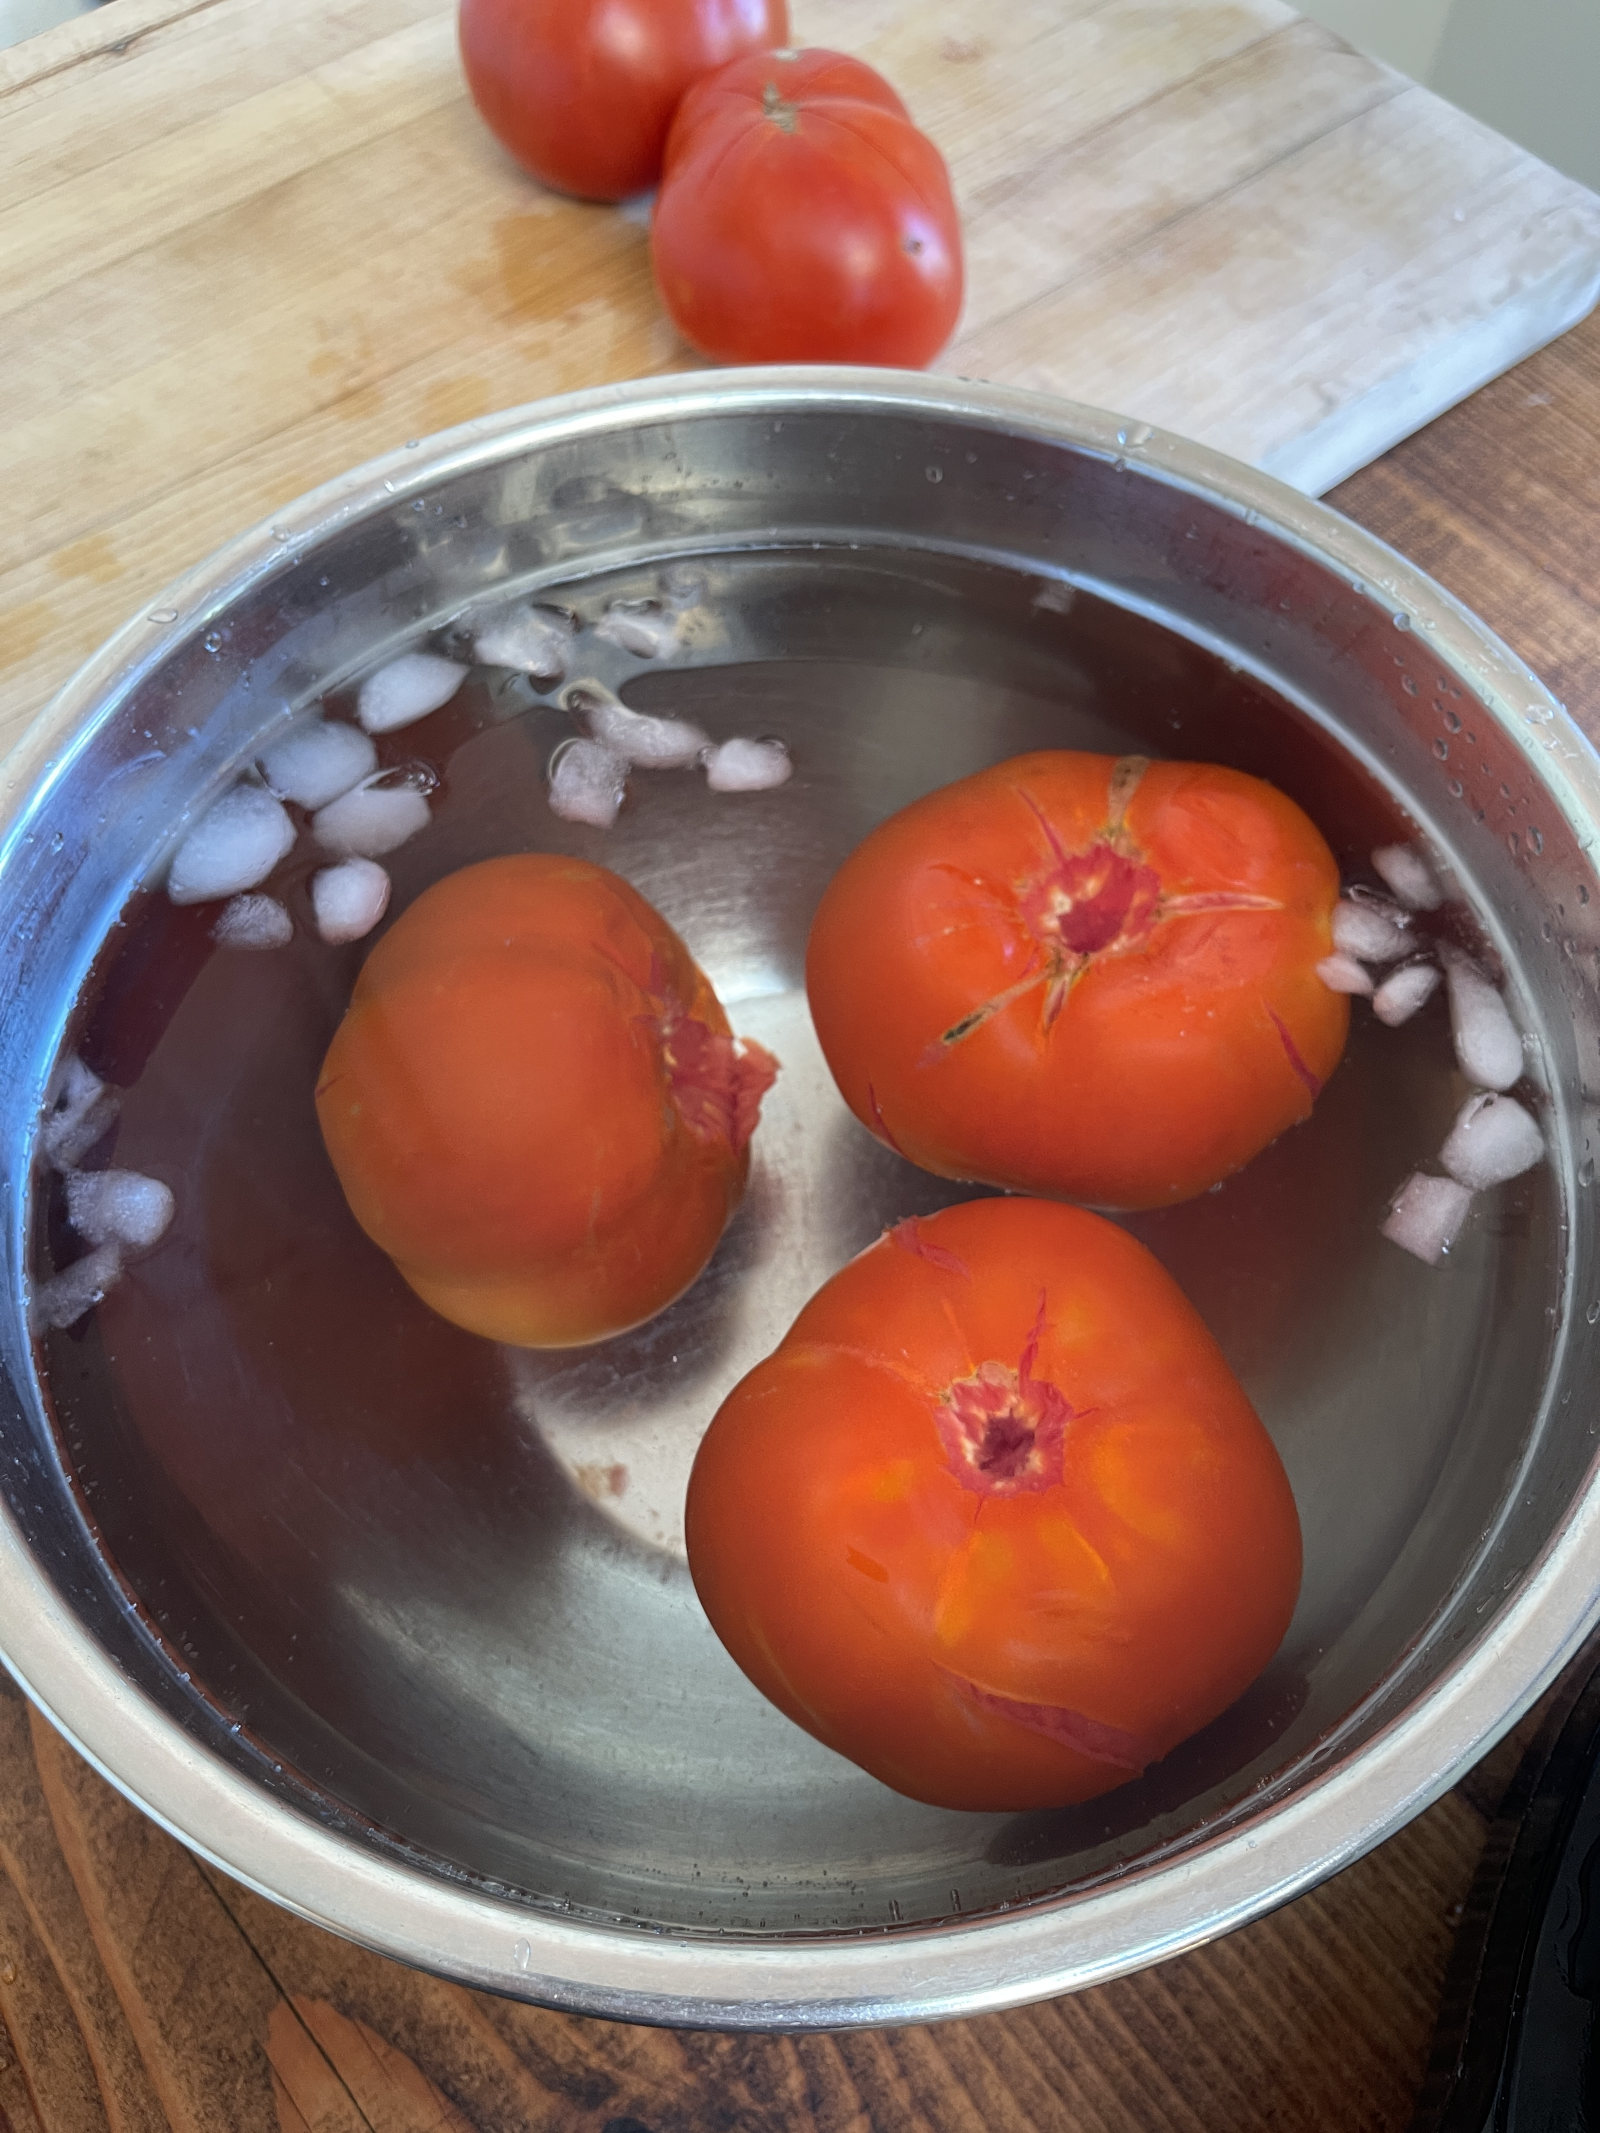 Three large blanched tomatoes cool in a stainless steel bowl filed with ice water and melting ice cubes. In the background is a cutting board with two fresh tomatoes sitting on it.